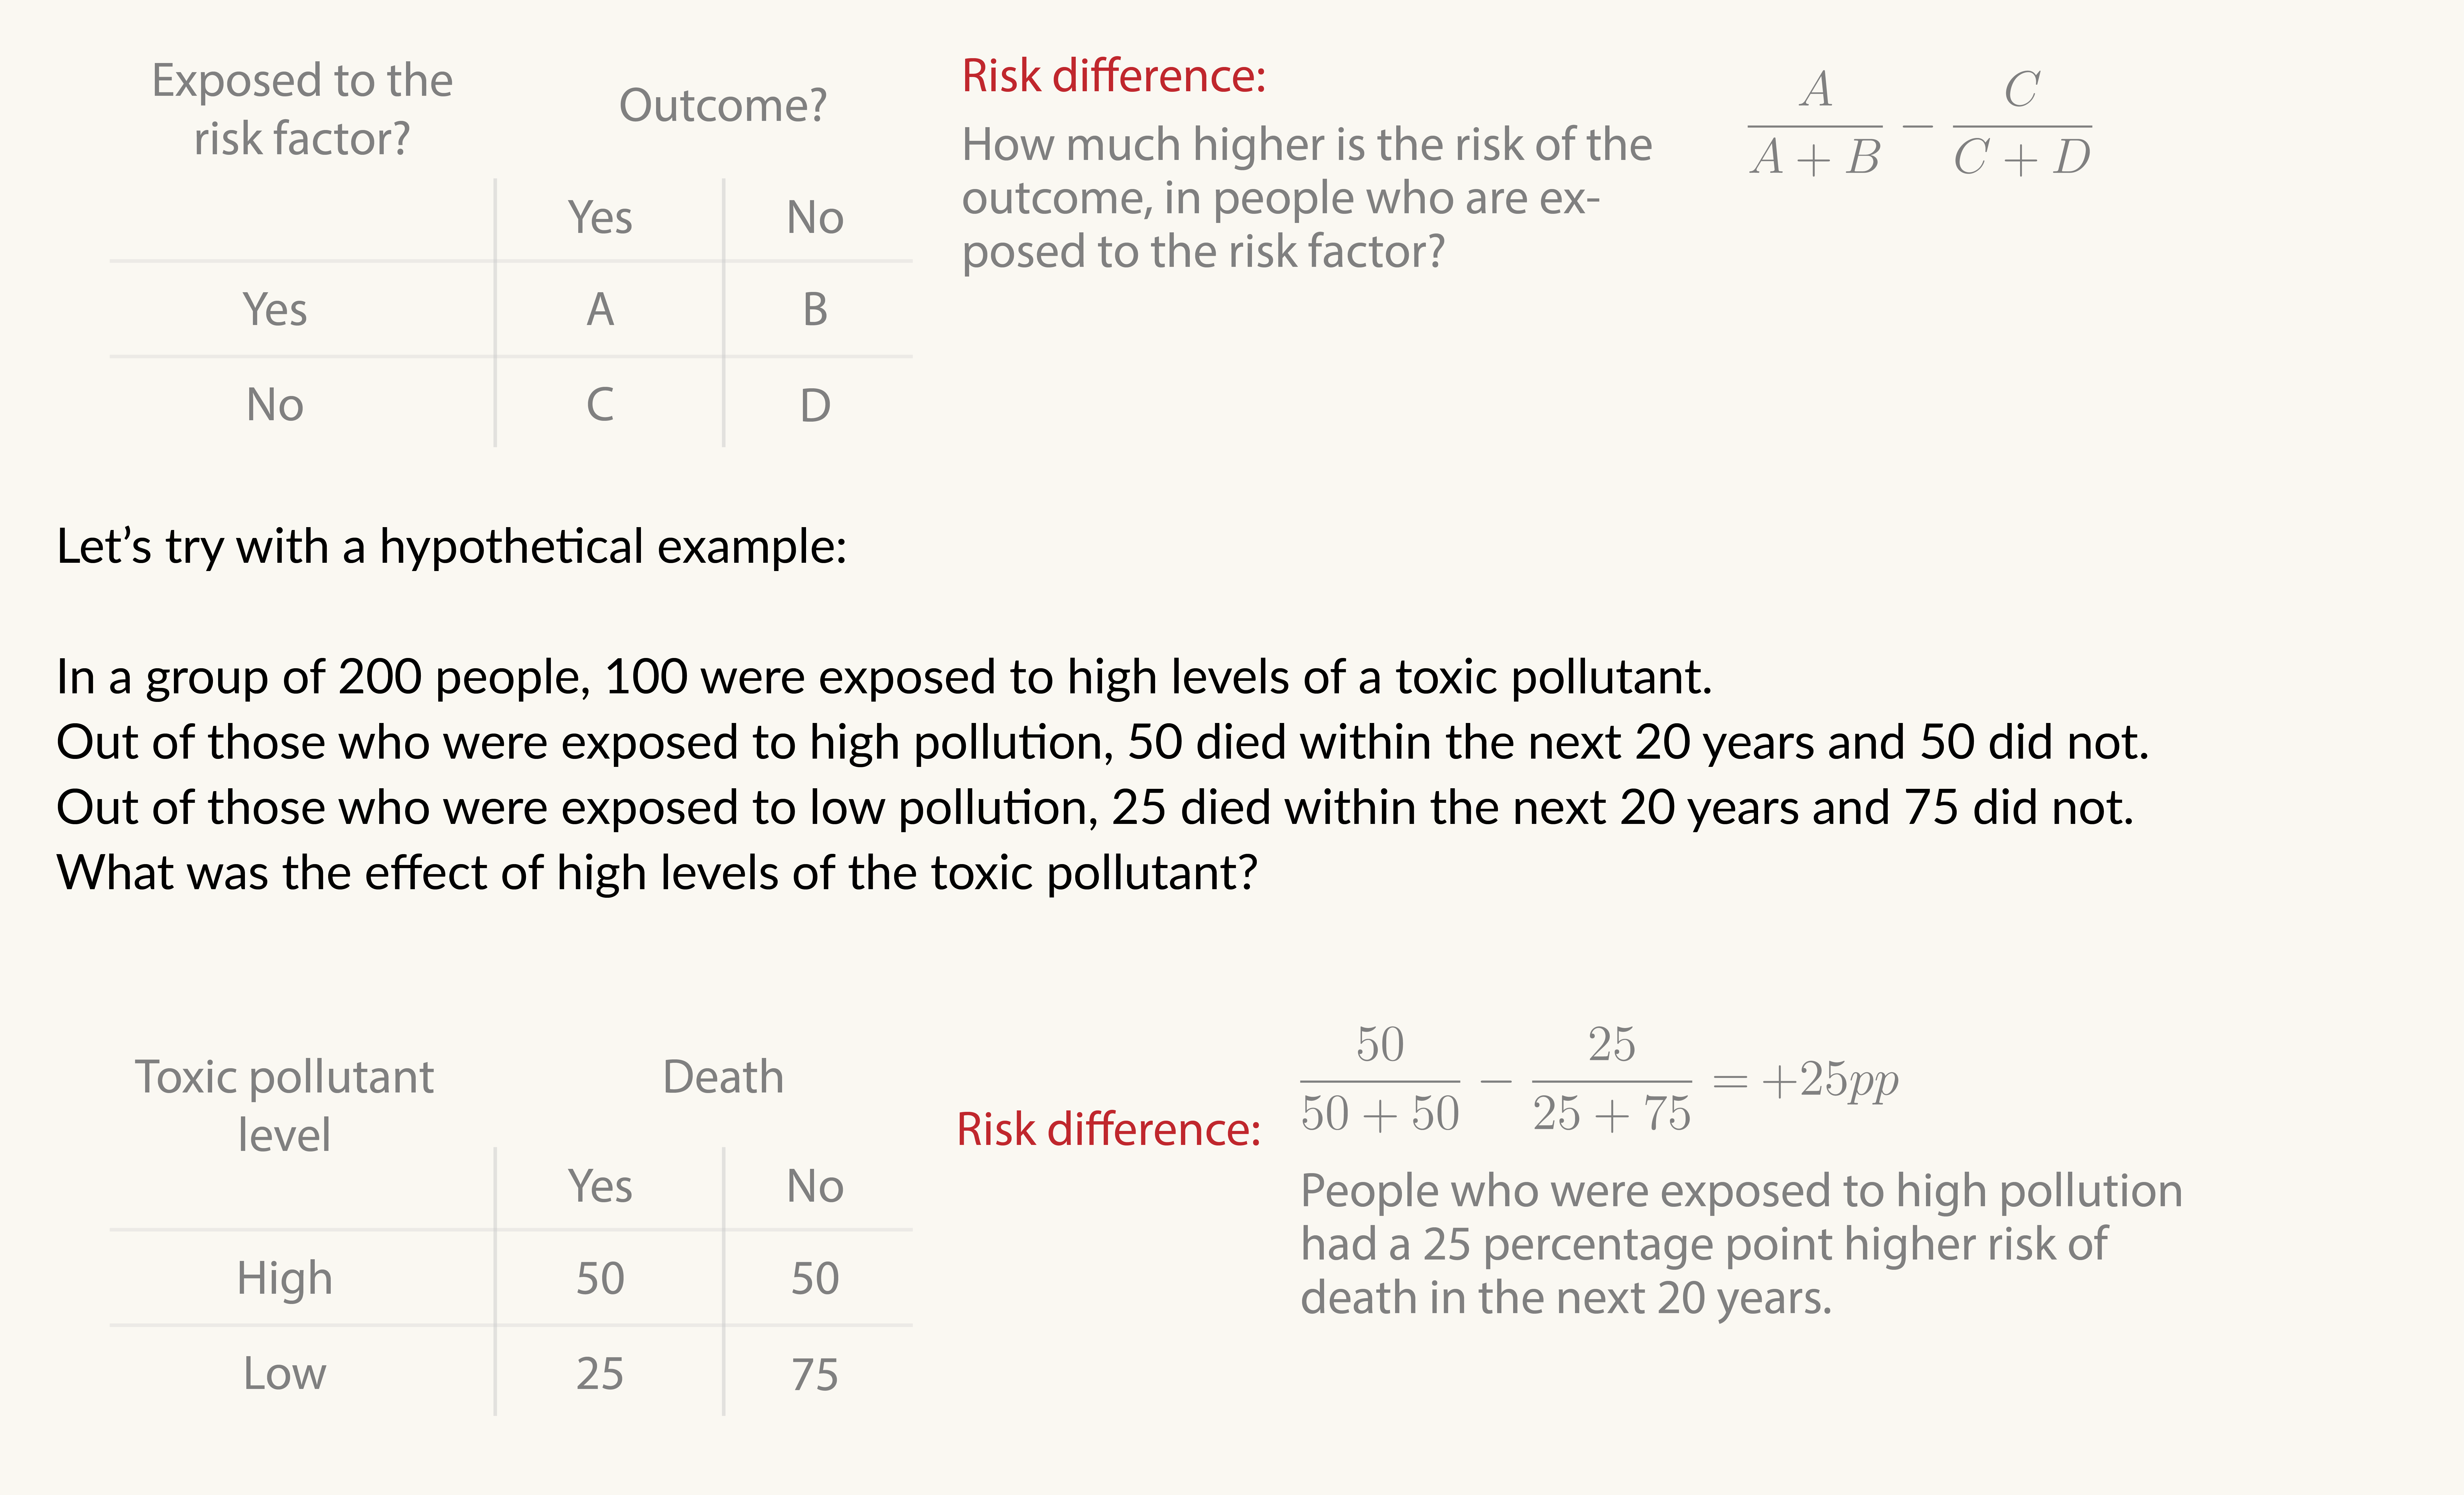 How to calculate the risk difference, with a hypothetical example